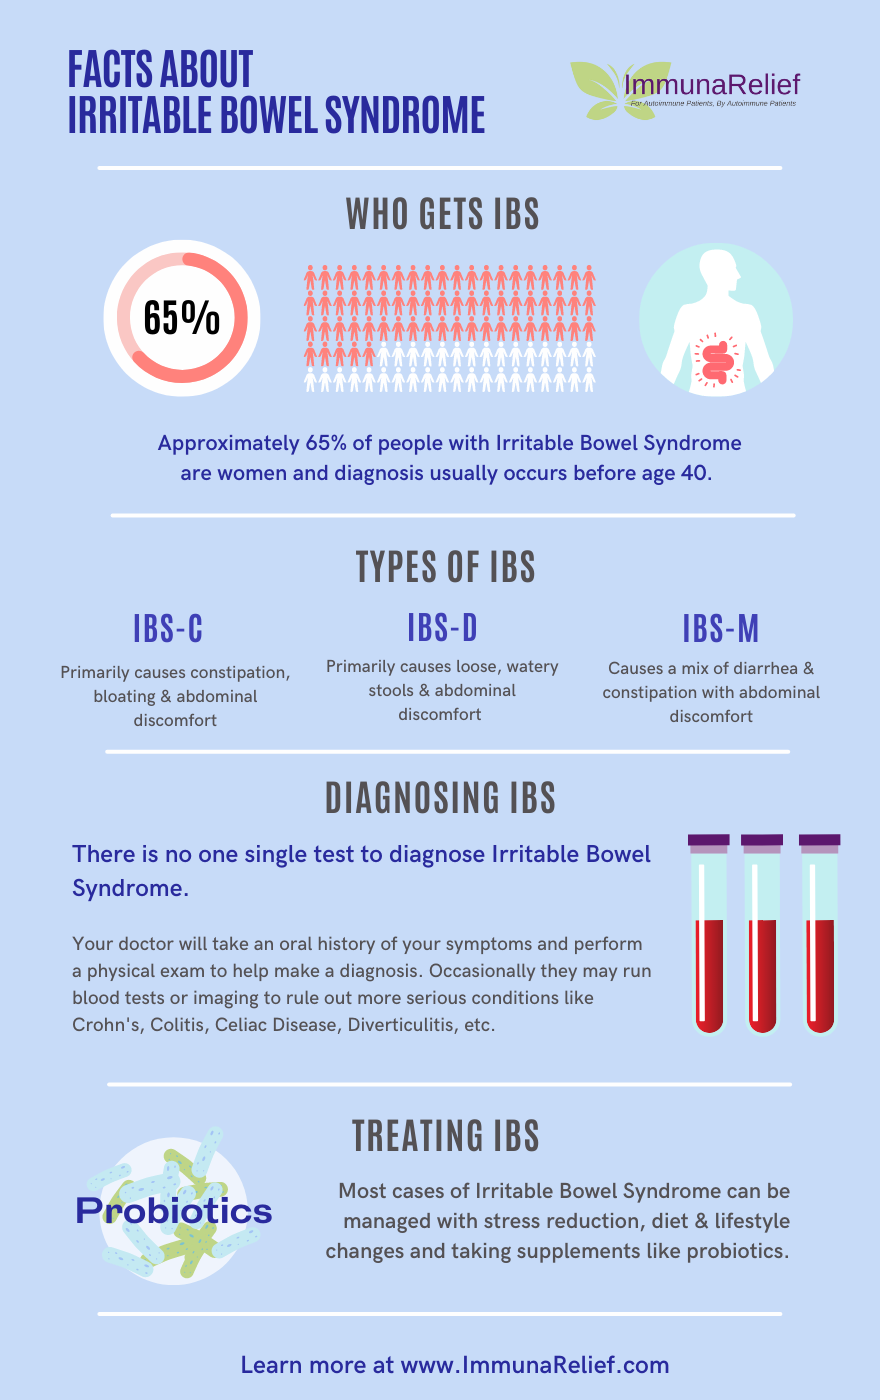 Types of IBS: Are you a C, D, M or U?